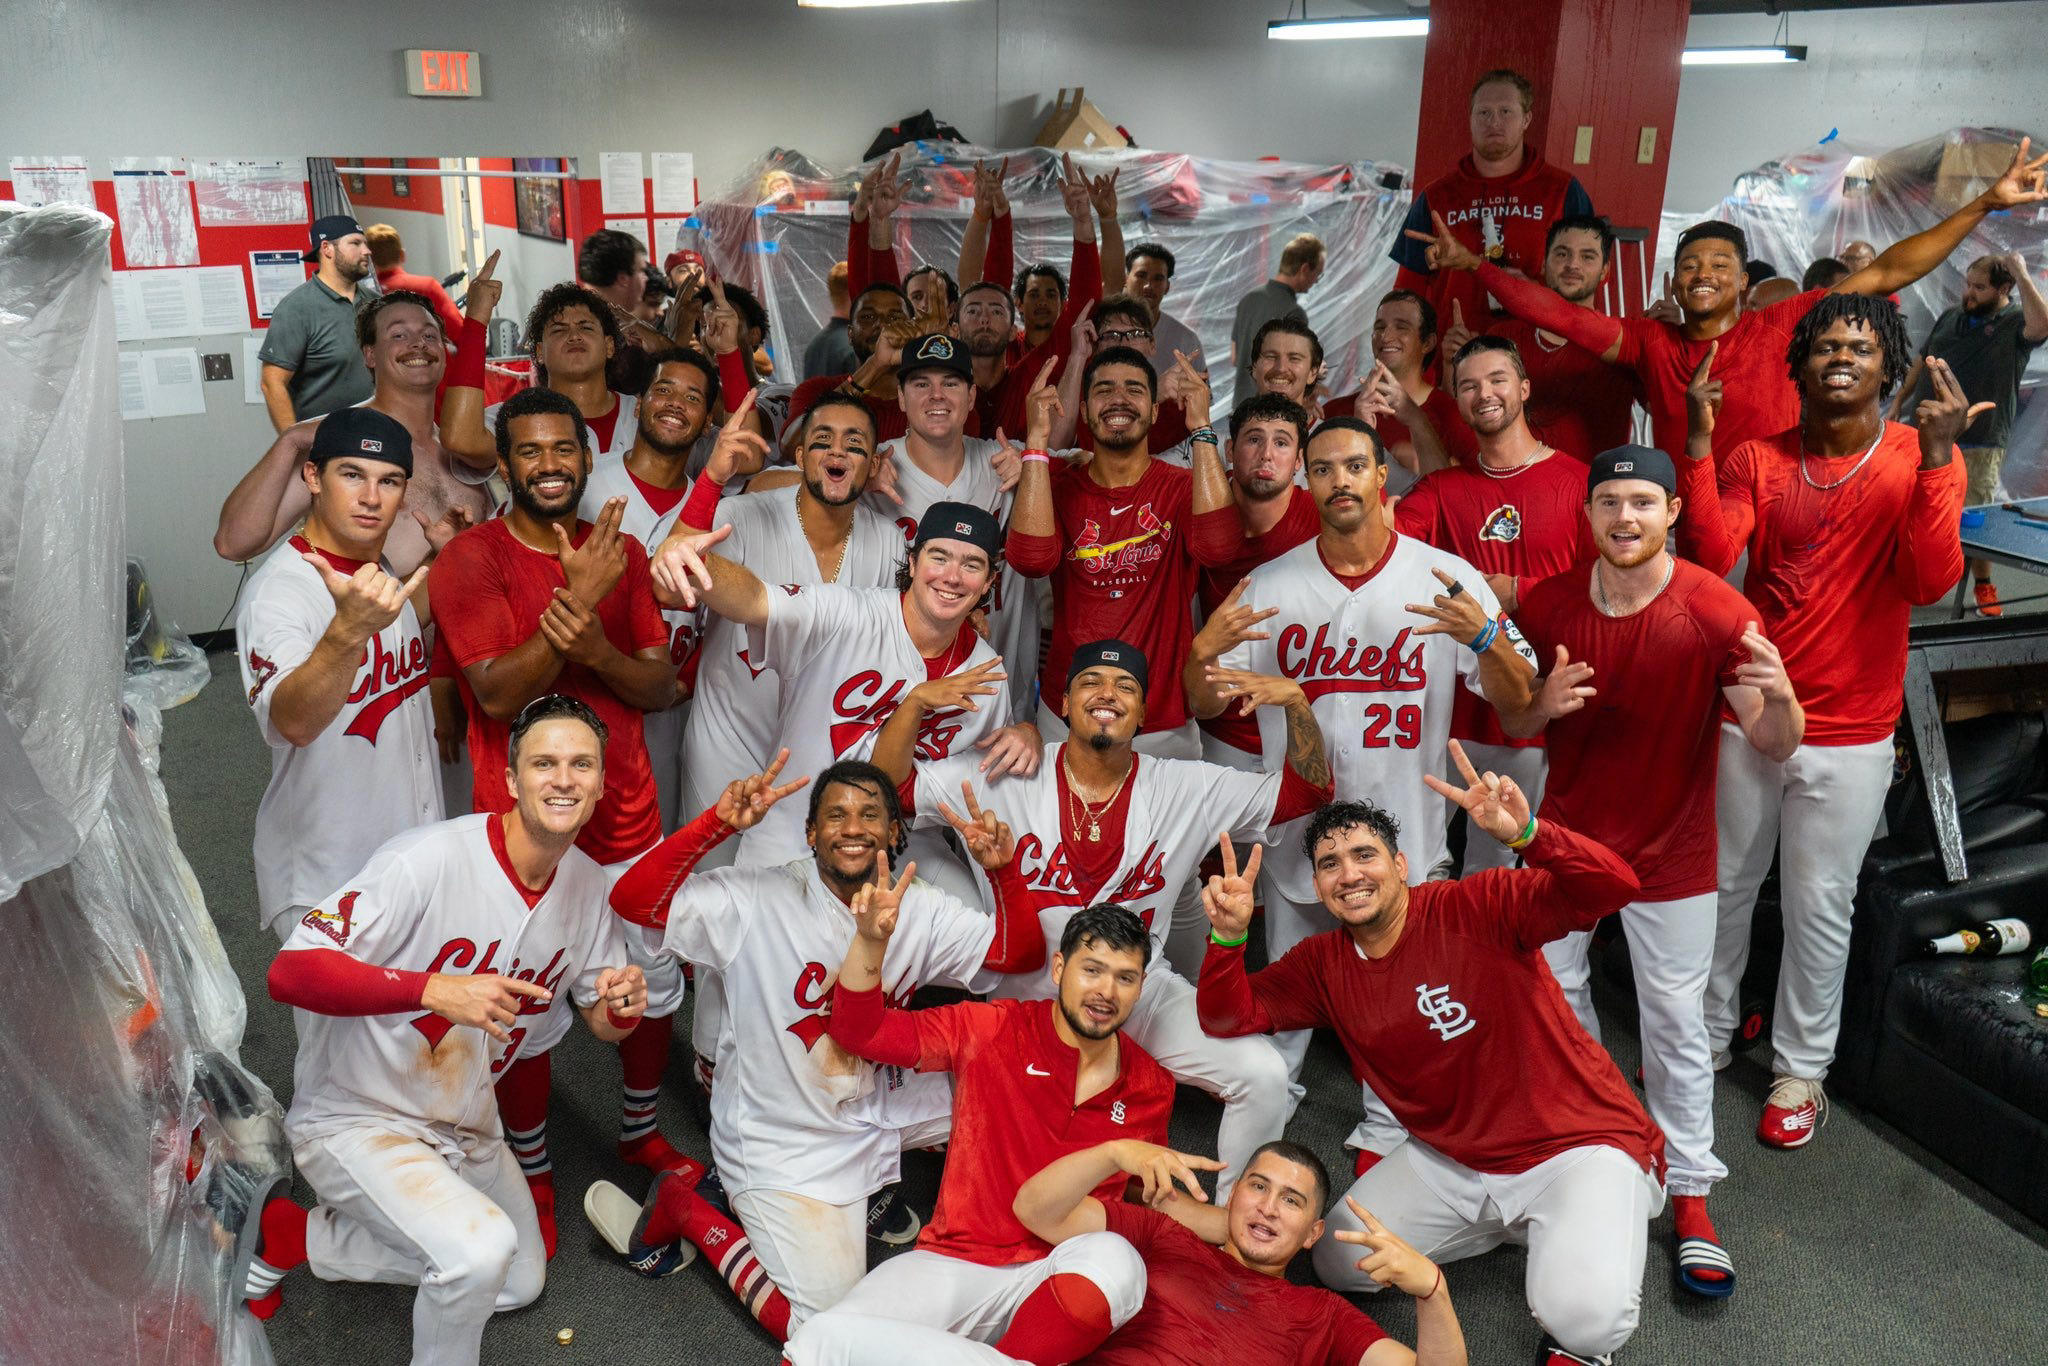 Peoria Chiefs baseball team clinches spot in 2023 Midwest League playoffs